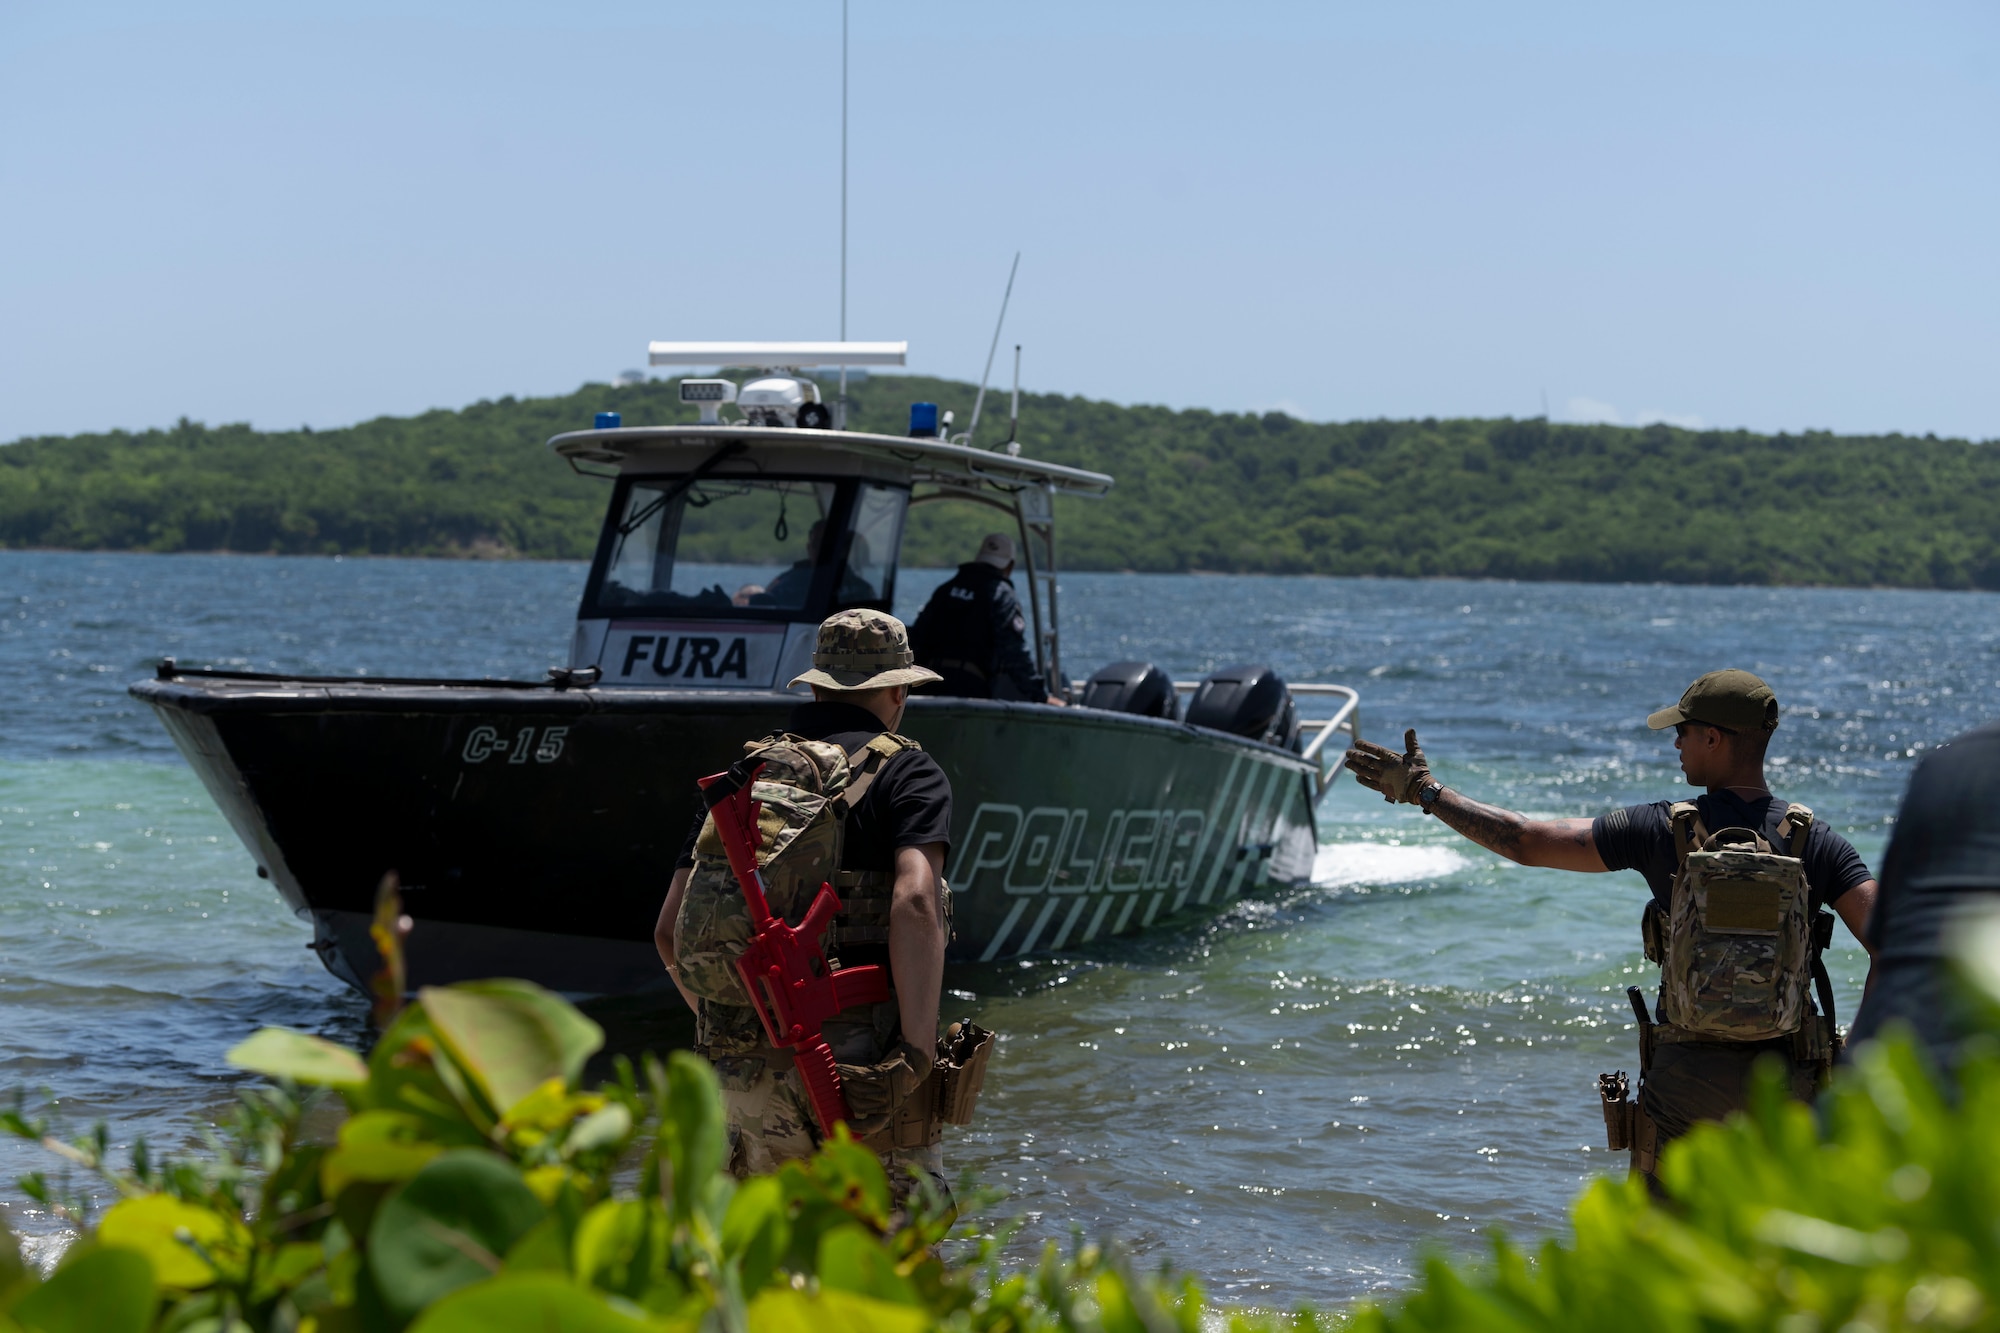 U.S. Airmen assigned to the 156th Security Operations Squadron, approach a boat assigned to the Puerto Rico Police Department, Unidad Marítima, Fuerzas Unidas de Rápida Acción, during the Advisor Edge exercise at Roosevelt Roads, Ceiba, Puerto Rico, June 8, 2023. Advisor Edge was a multi-unit exercise with the integration of government agencies, where participant units tested air advising skills and strengthened partnerships through unique challenges, allowing burden sharing in combat with partner nations. (U.S. Air National Guard photo by Master Sgt. Rafael D. Rosa)